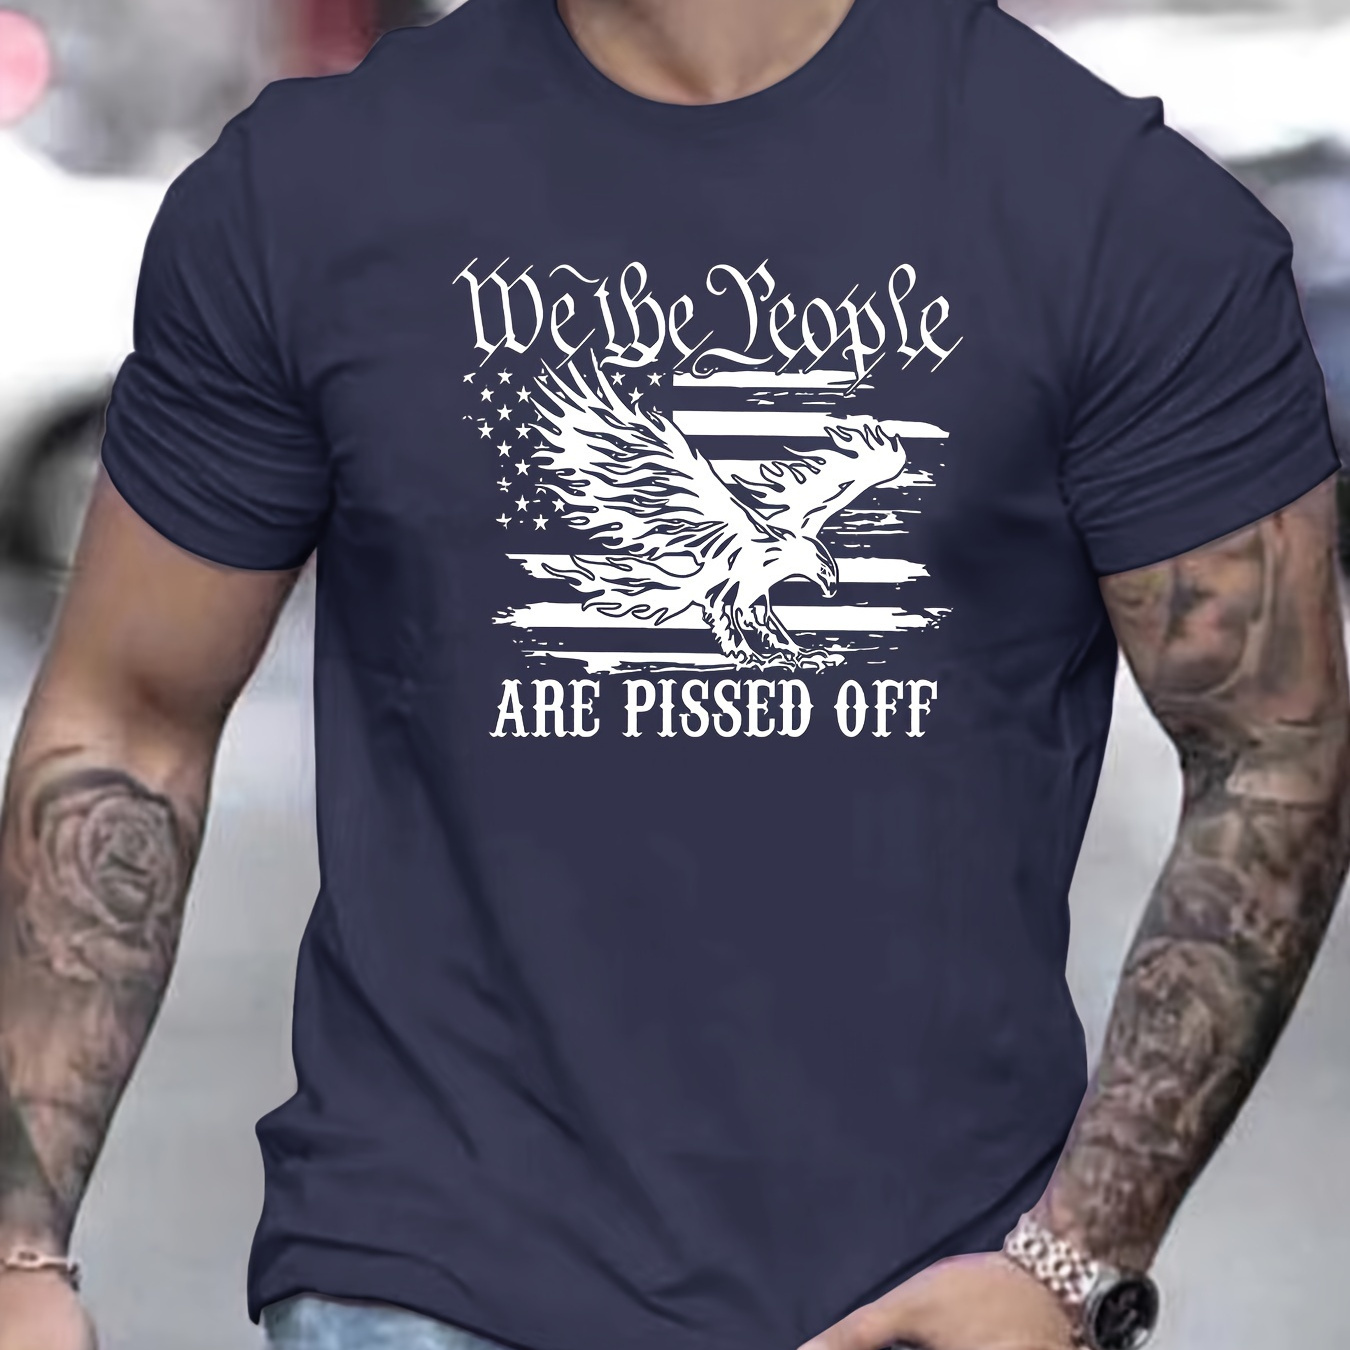 

We The People... Print T Shirt, Tees For Men, Casual Short Sleeve T-shirt For Summer